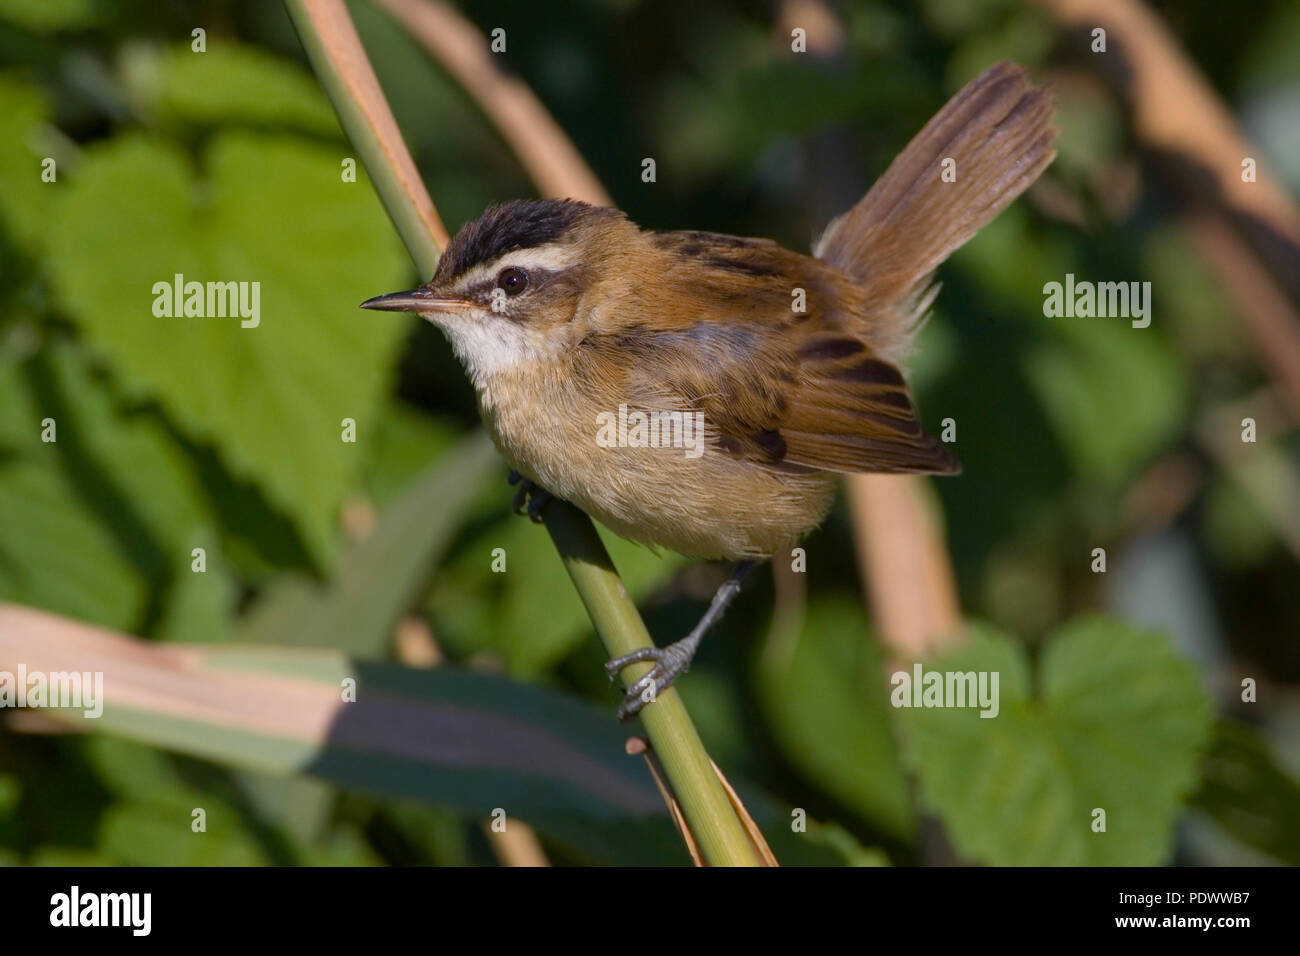 Moustached Warbler sitting on a green twig, side-view. Stock Photo